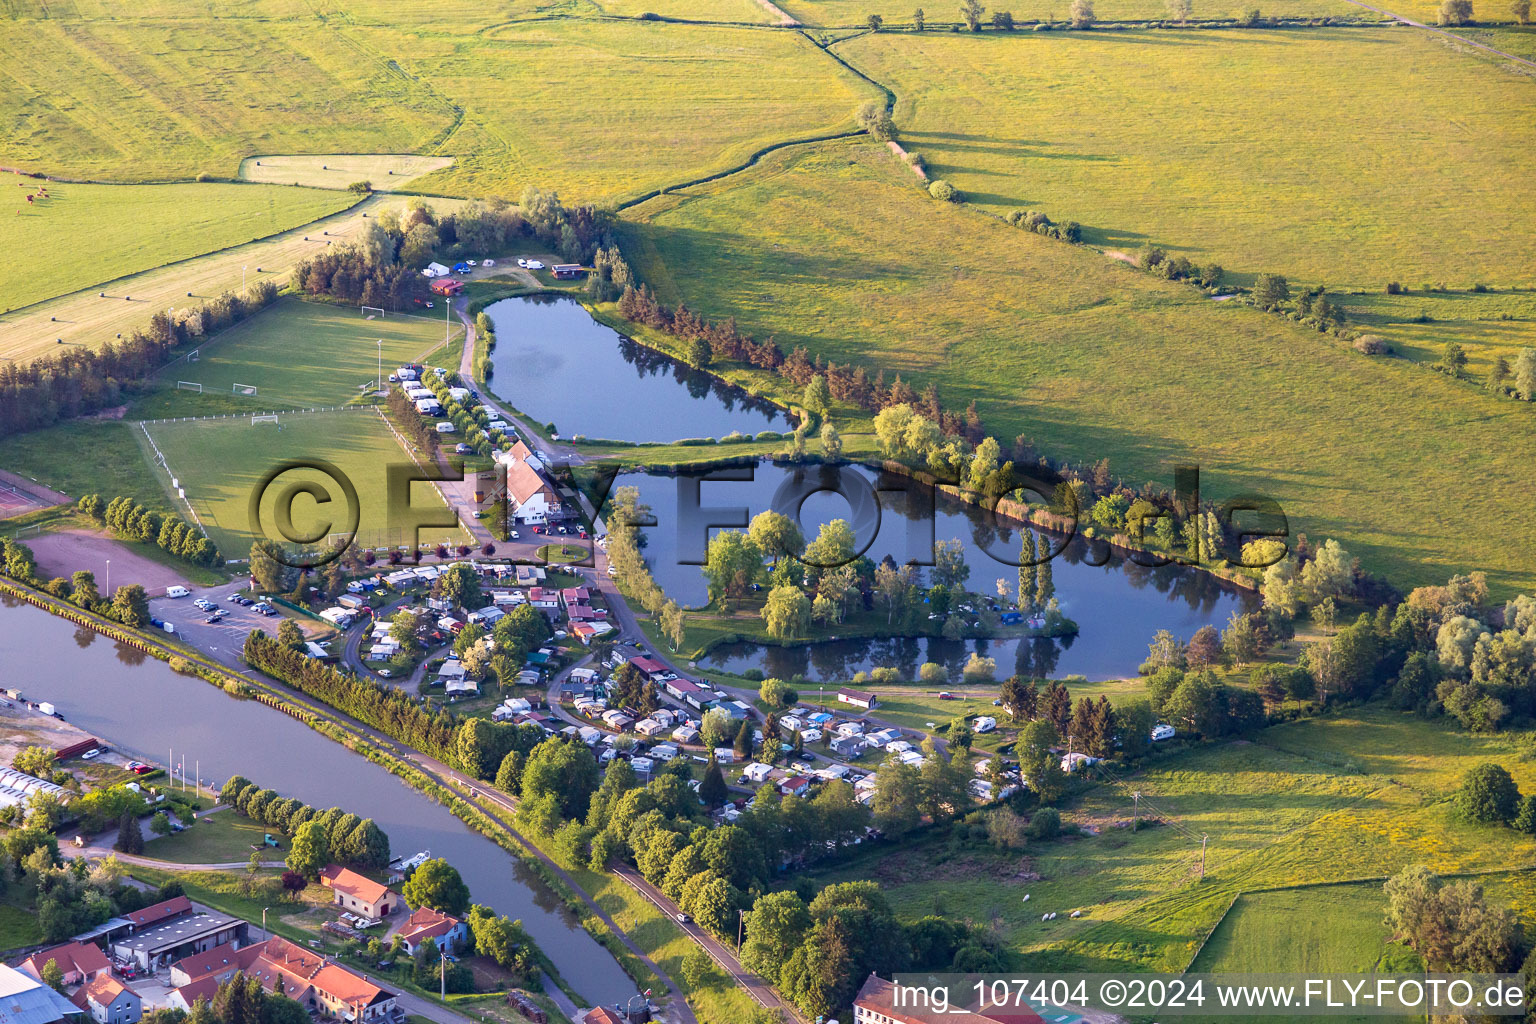 Aerial view of Camping Coeur d'Alsace in Harskirchen in the state Bas-Rhin, France